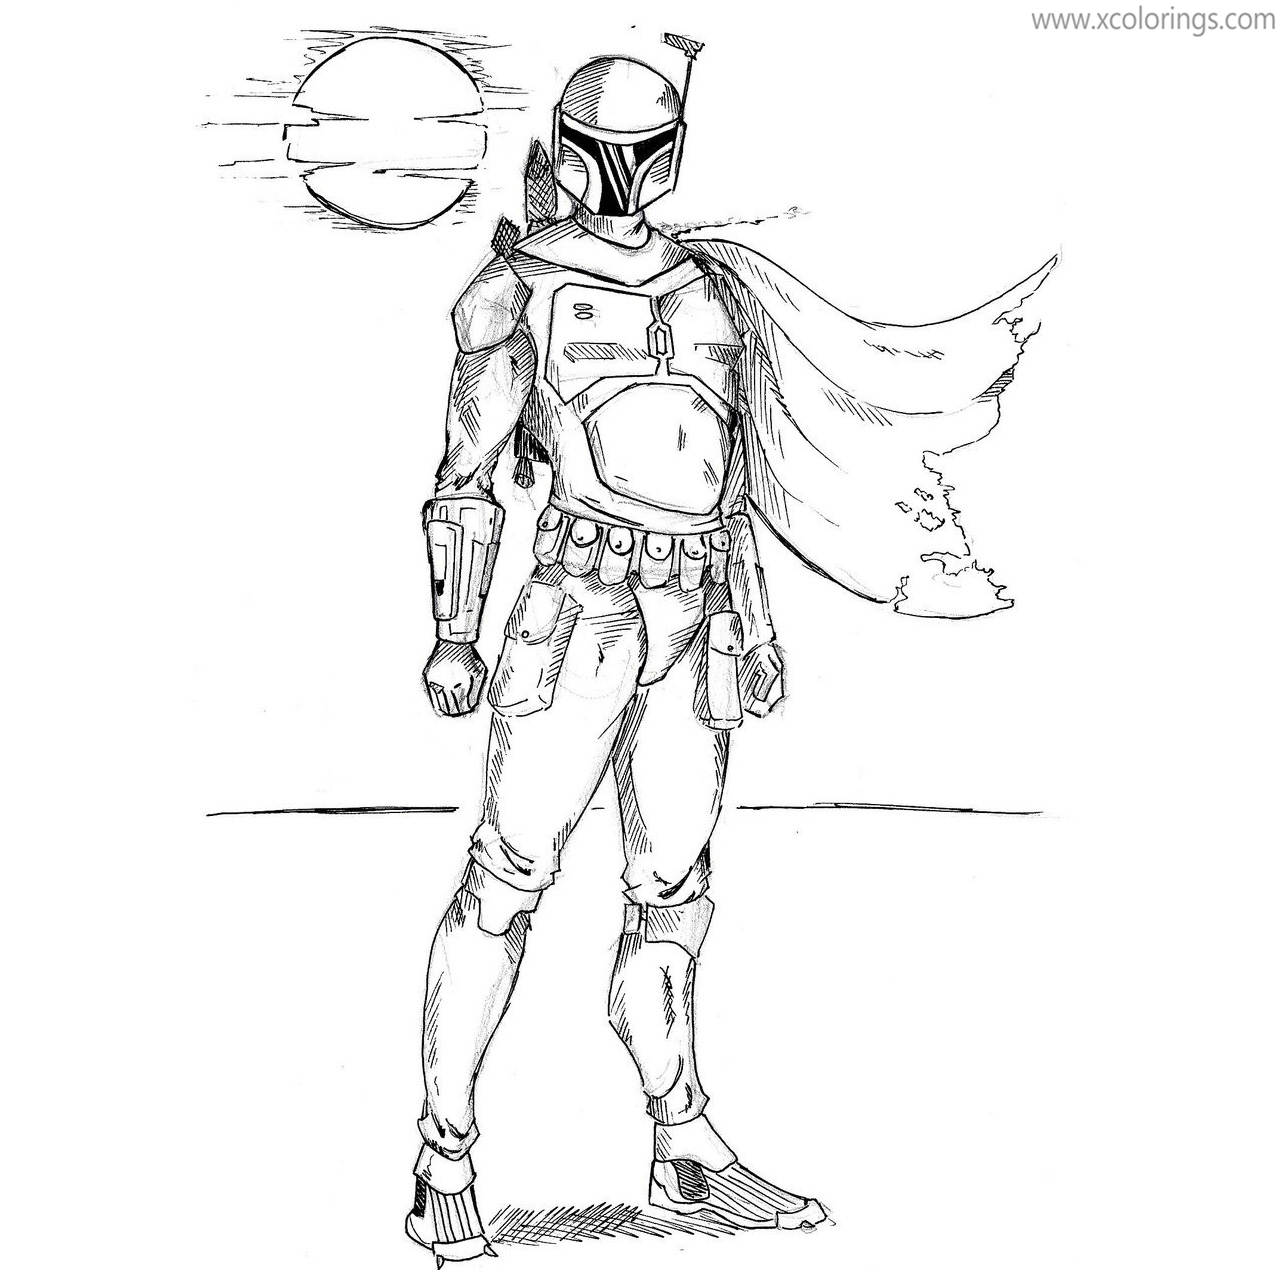 Free Mandalorian Boba Fett Coloring Pages with Moon printable